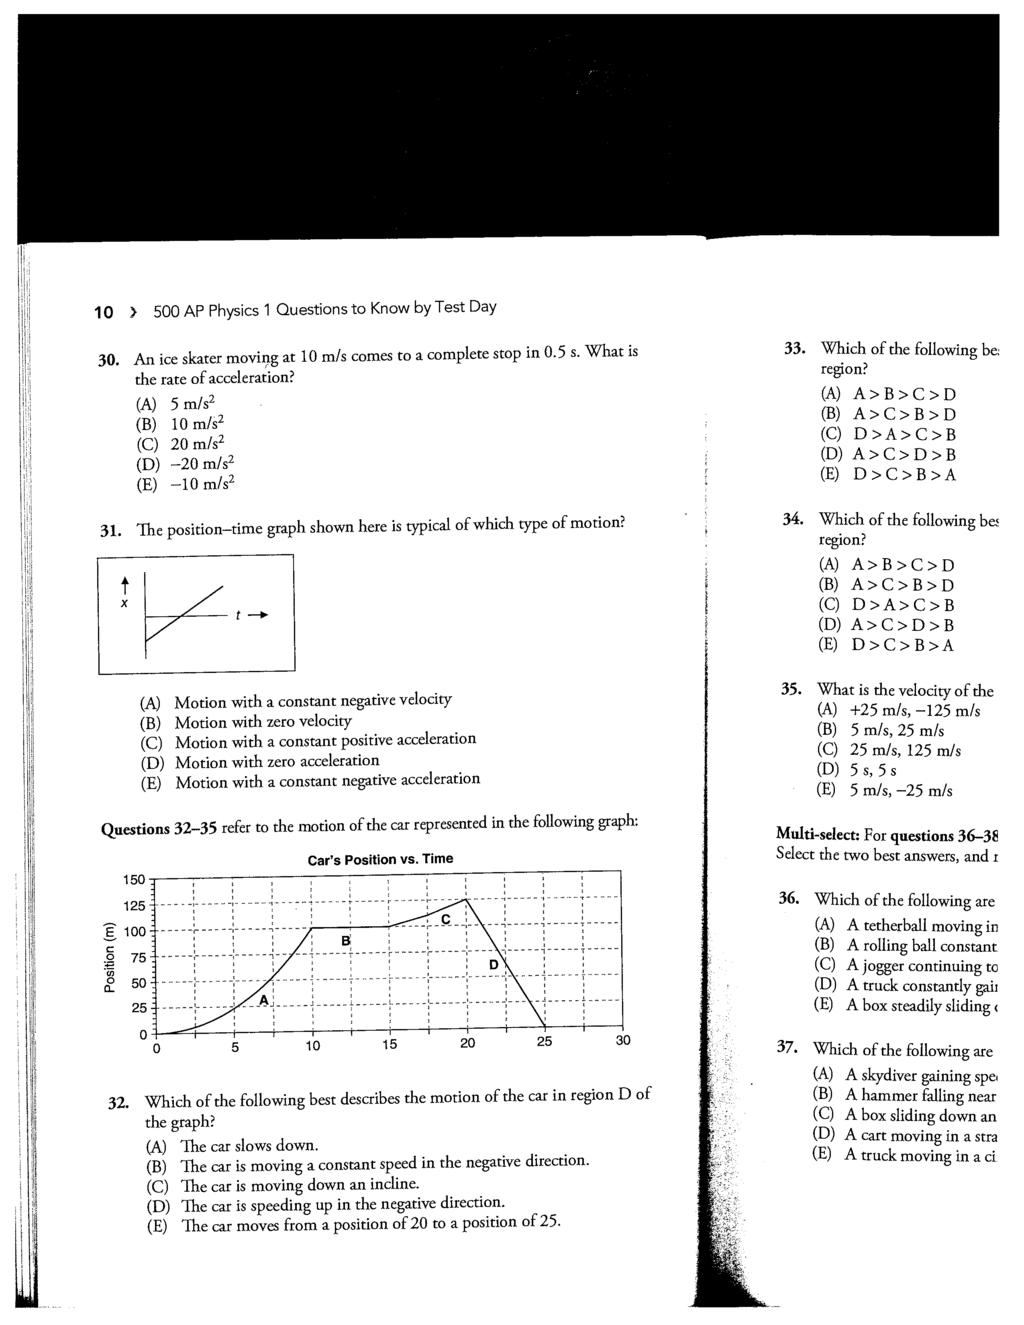 10 > 500 AP Physics 1 Questions to Know by Test Day 30. An ice skater moving at 10 m/s comes to a complete stop in 0.5 s. What is the rate of acceleration?